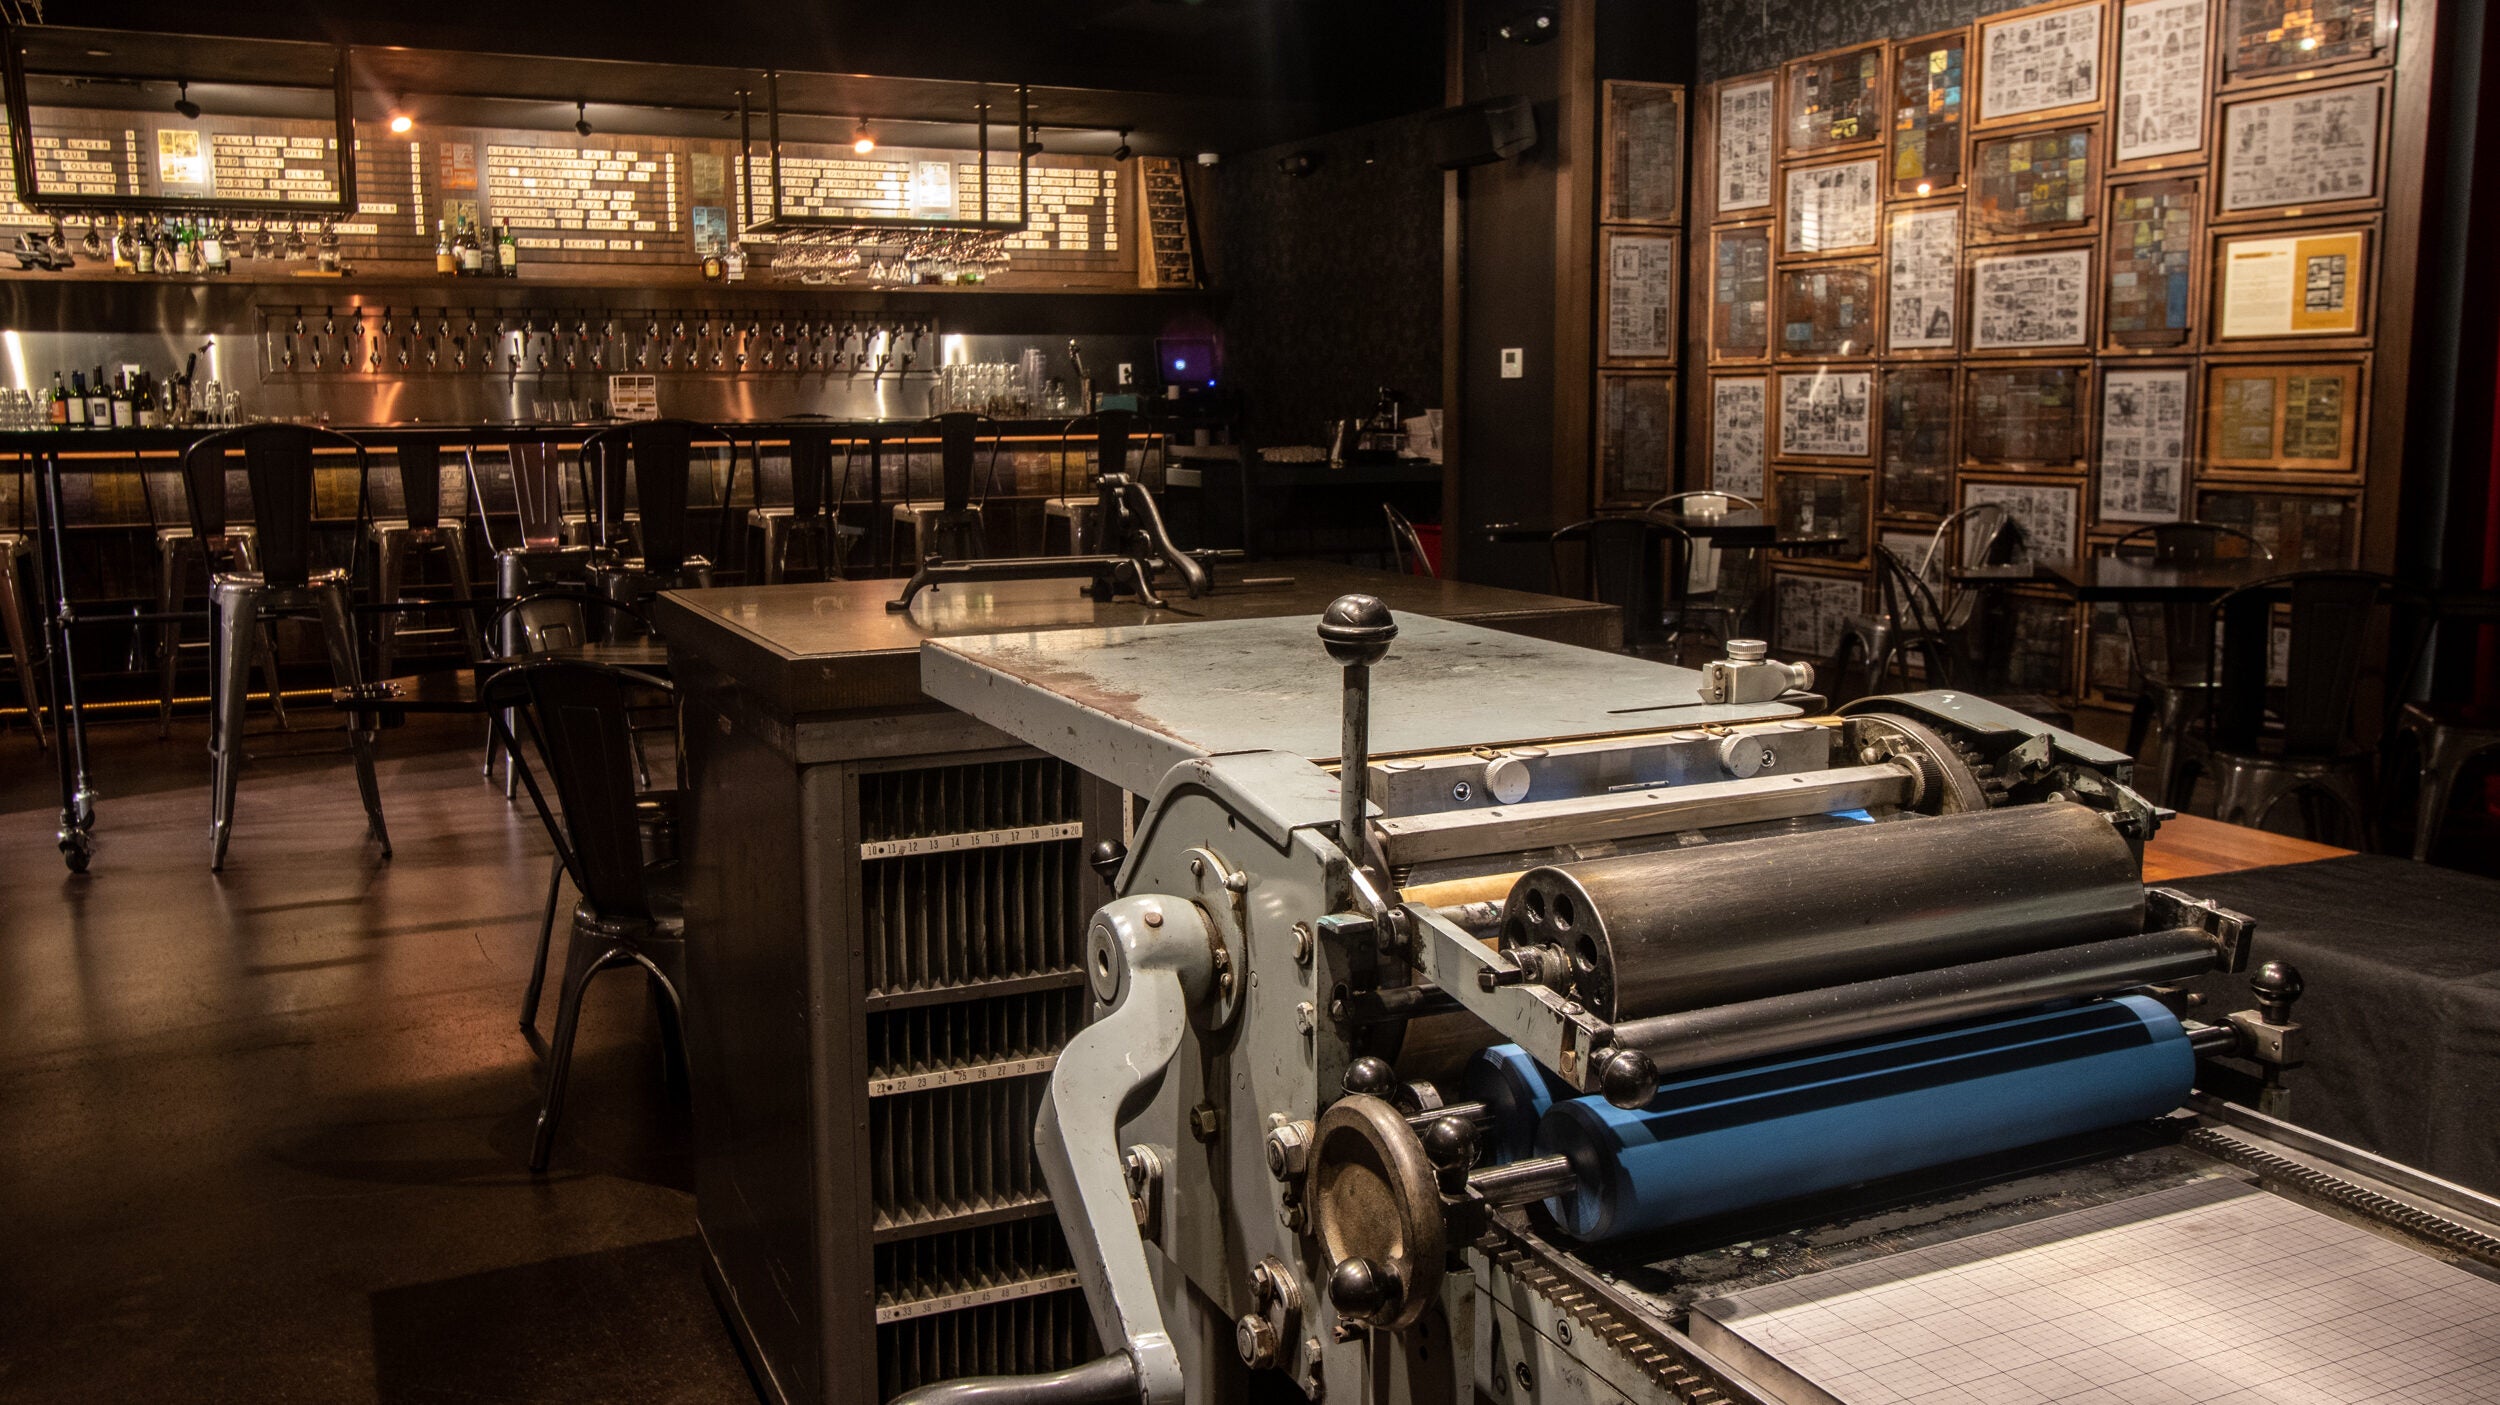 The Press Room Bar at Alamo Drafthouse in New York City, which will resemble the bar at its upcoming Boston location.